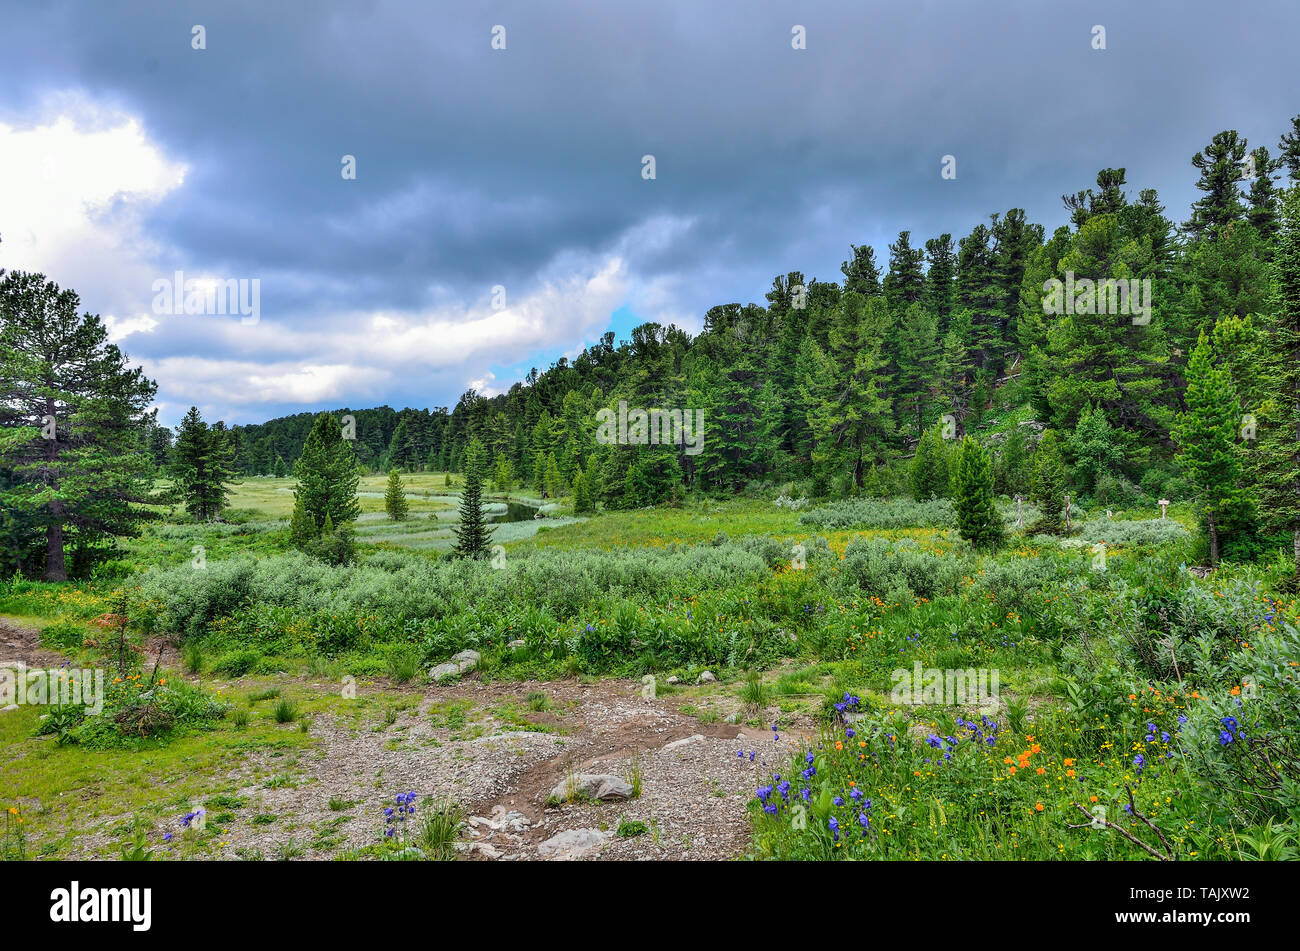 Beautiful summer landscape in Altai mountains, Russia, with crystal creek, blooming alpine meadow with multicolored wild flowers, coniferous forest Stock Photo